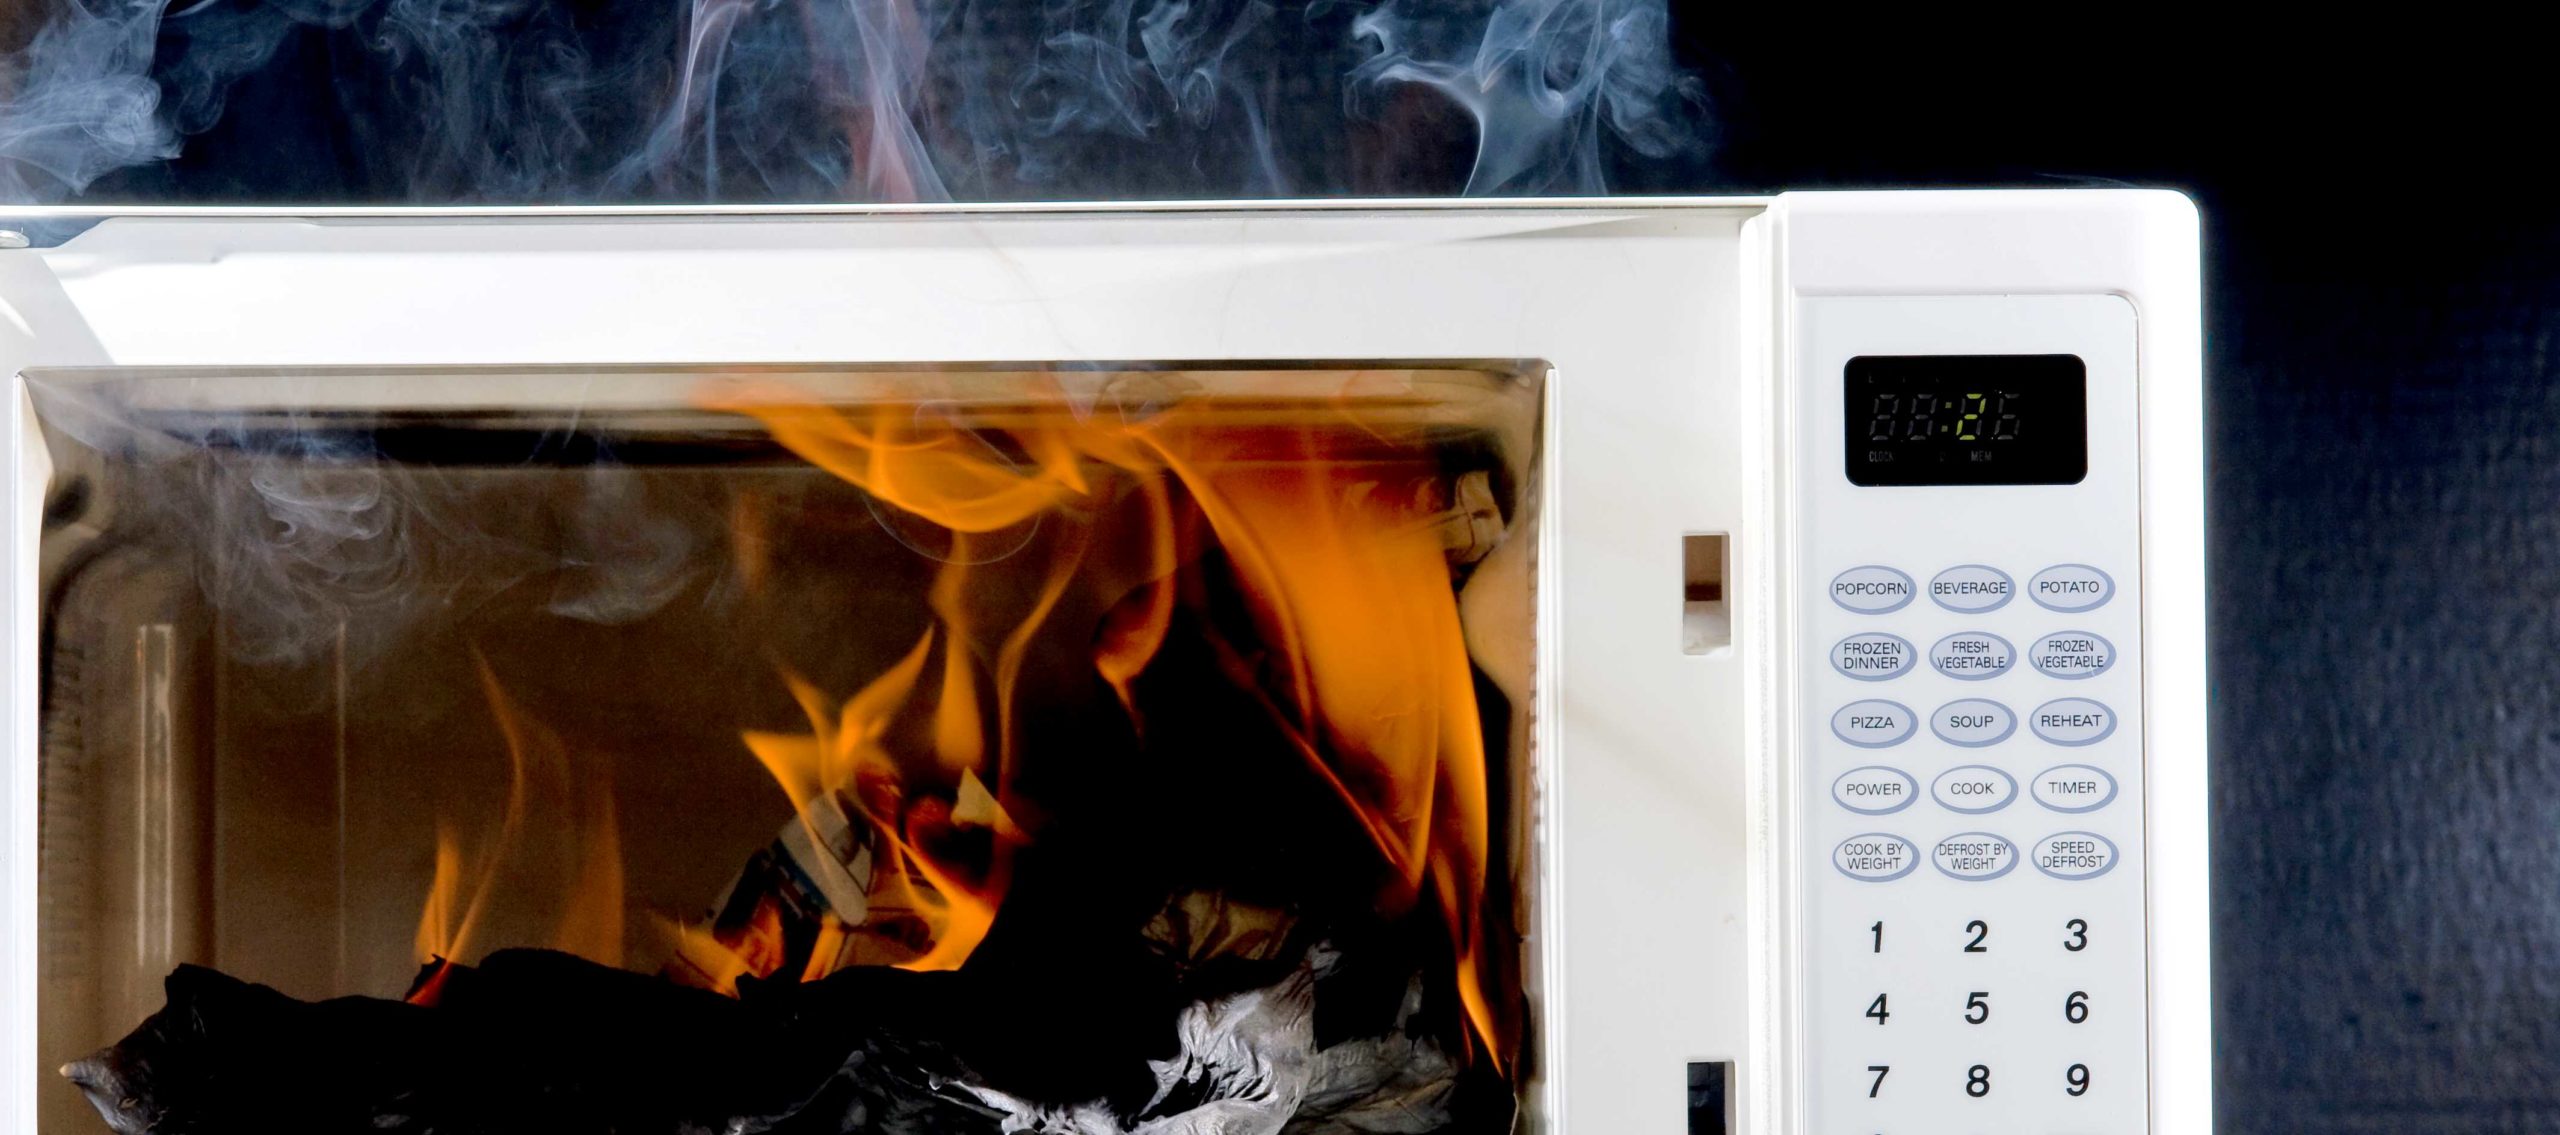 https://purocleanwaterdamagerestorationspringfieldmo.com/wp-content/uploads/2022/01/Microwave-Safety-Tips-to-Avoid-Fire-Damage-in-Springfield-Missouri-scaled.jpg